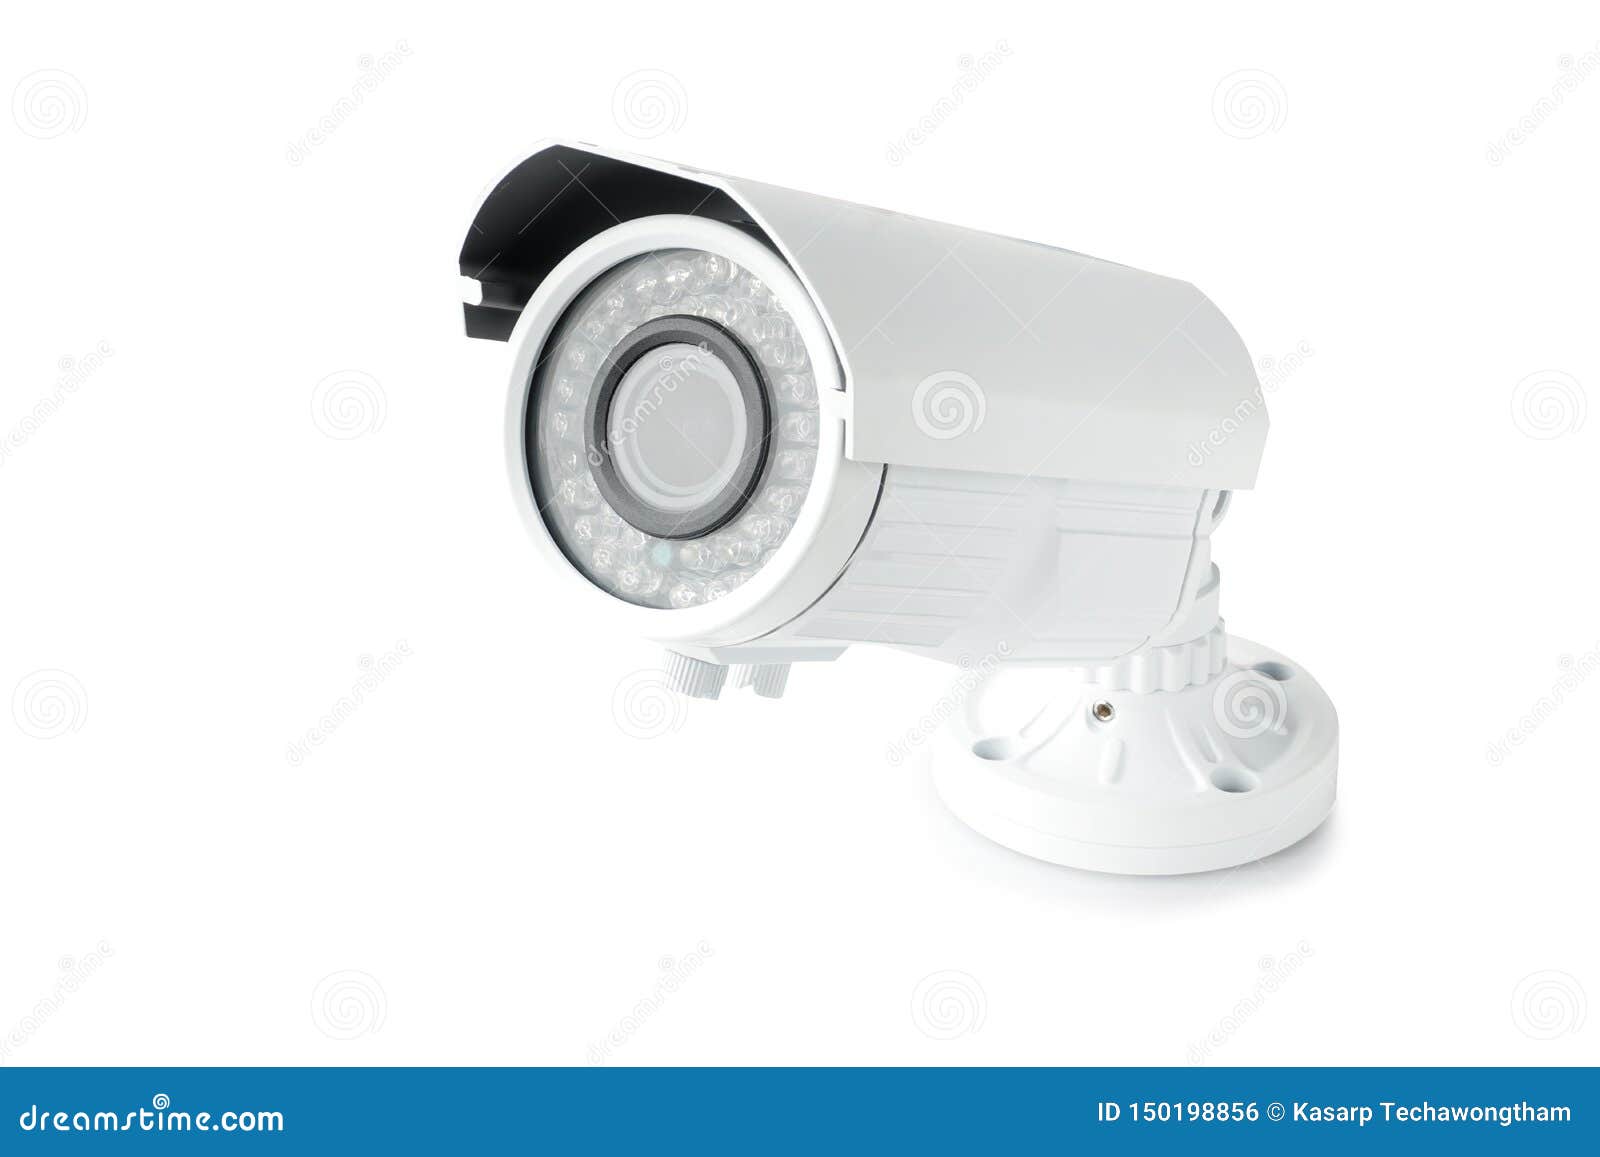 wireless security cameras,cameras that transmit a video and audio signal to a wireless receiver through provide seamless video str